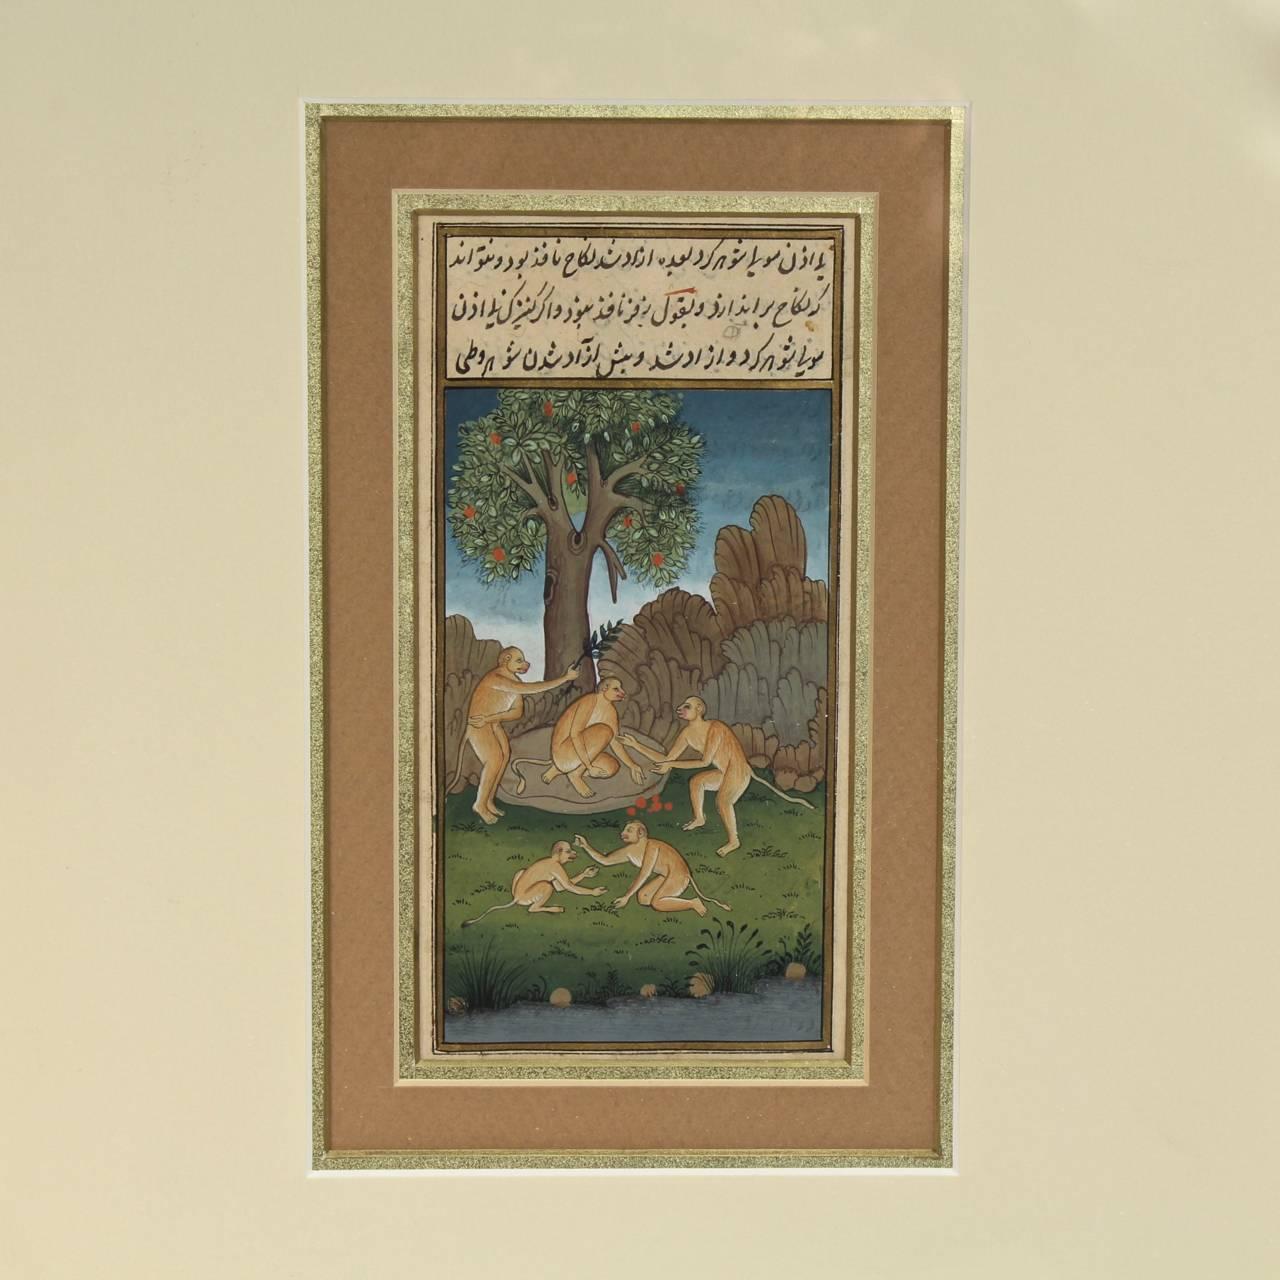 A fine antique Indian or Indo-Persia Moghul Islamic Illustrated manuscript folio.

Depicting monkeys gathering fruit at the base of the tree.

Polychrome hand illustrated decoration on paper. 

Mounted under matte and glass in a wooden